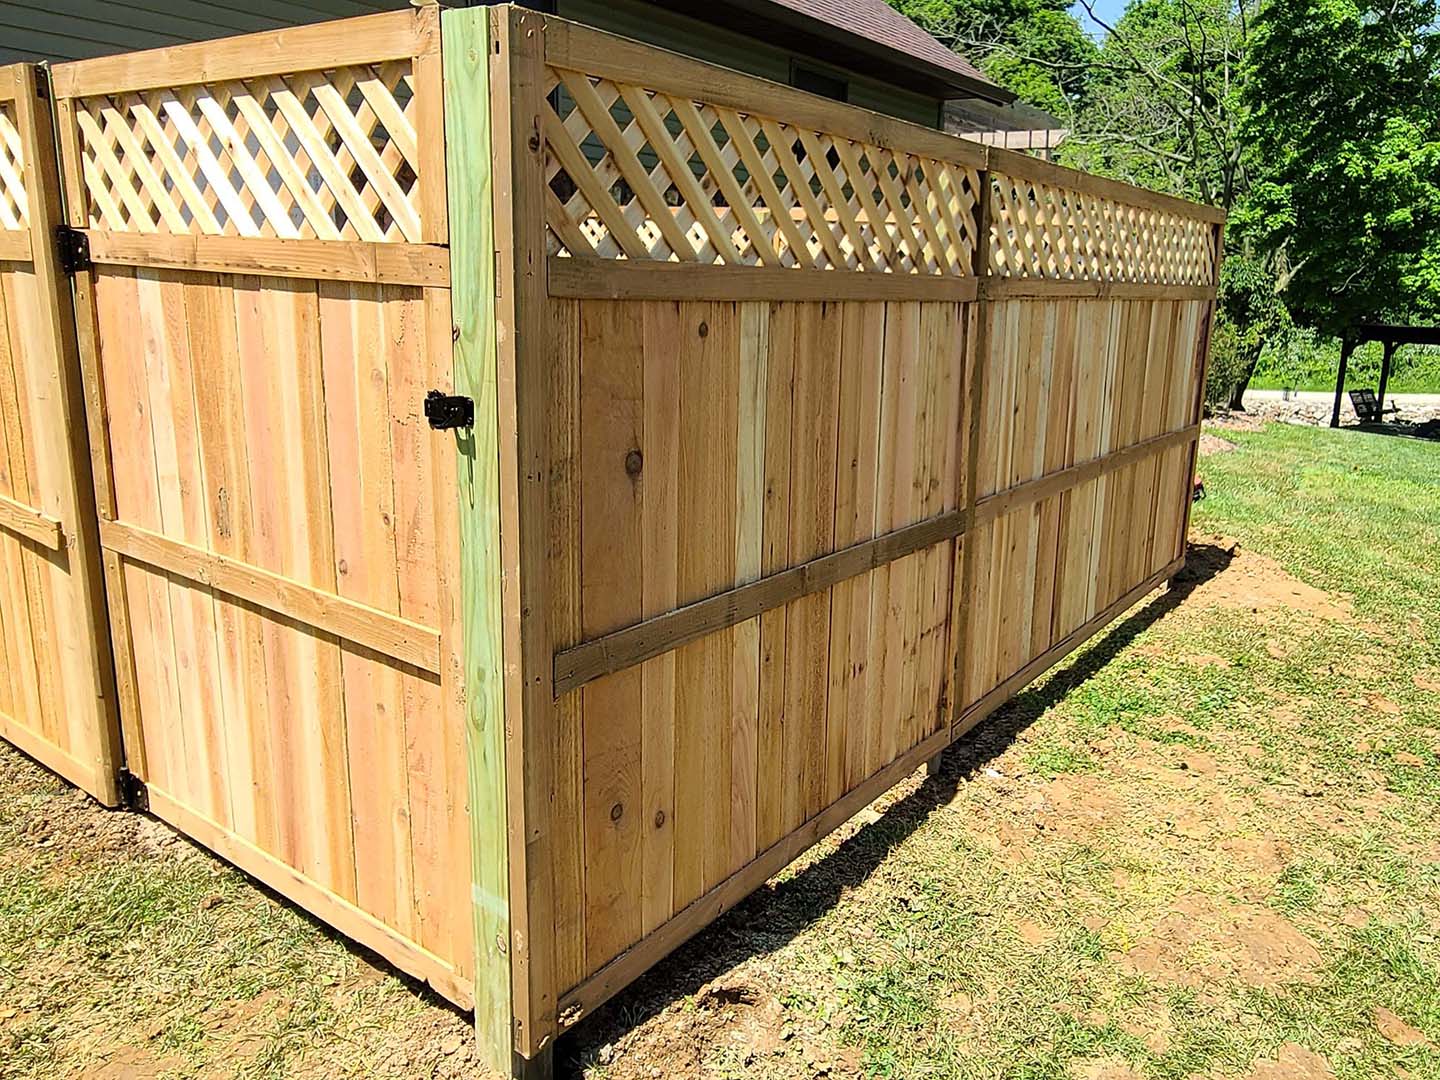 Ellettsville Indiana residential fencing company